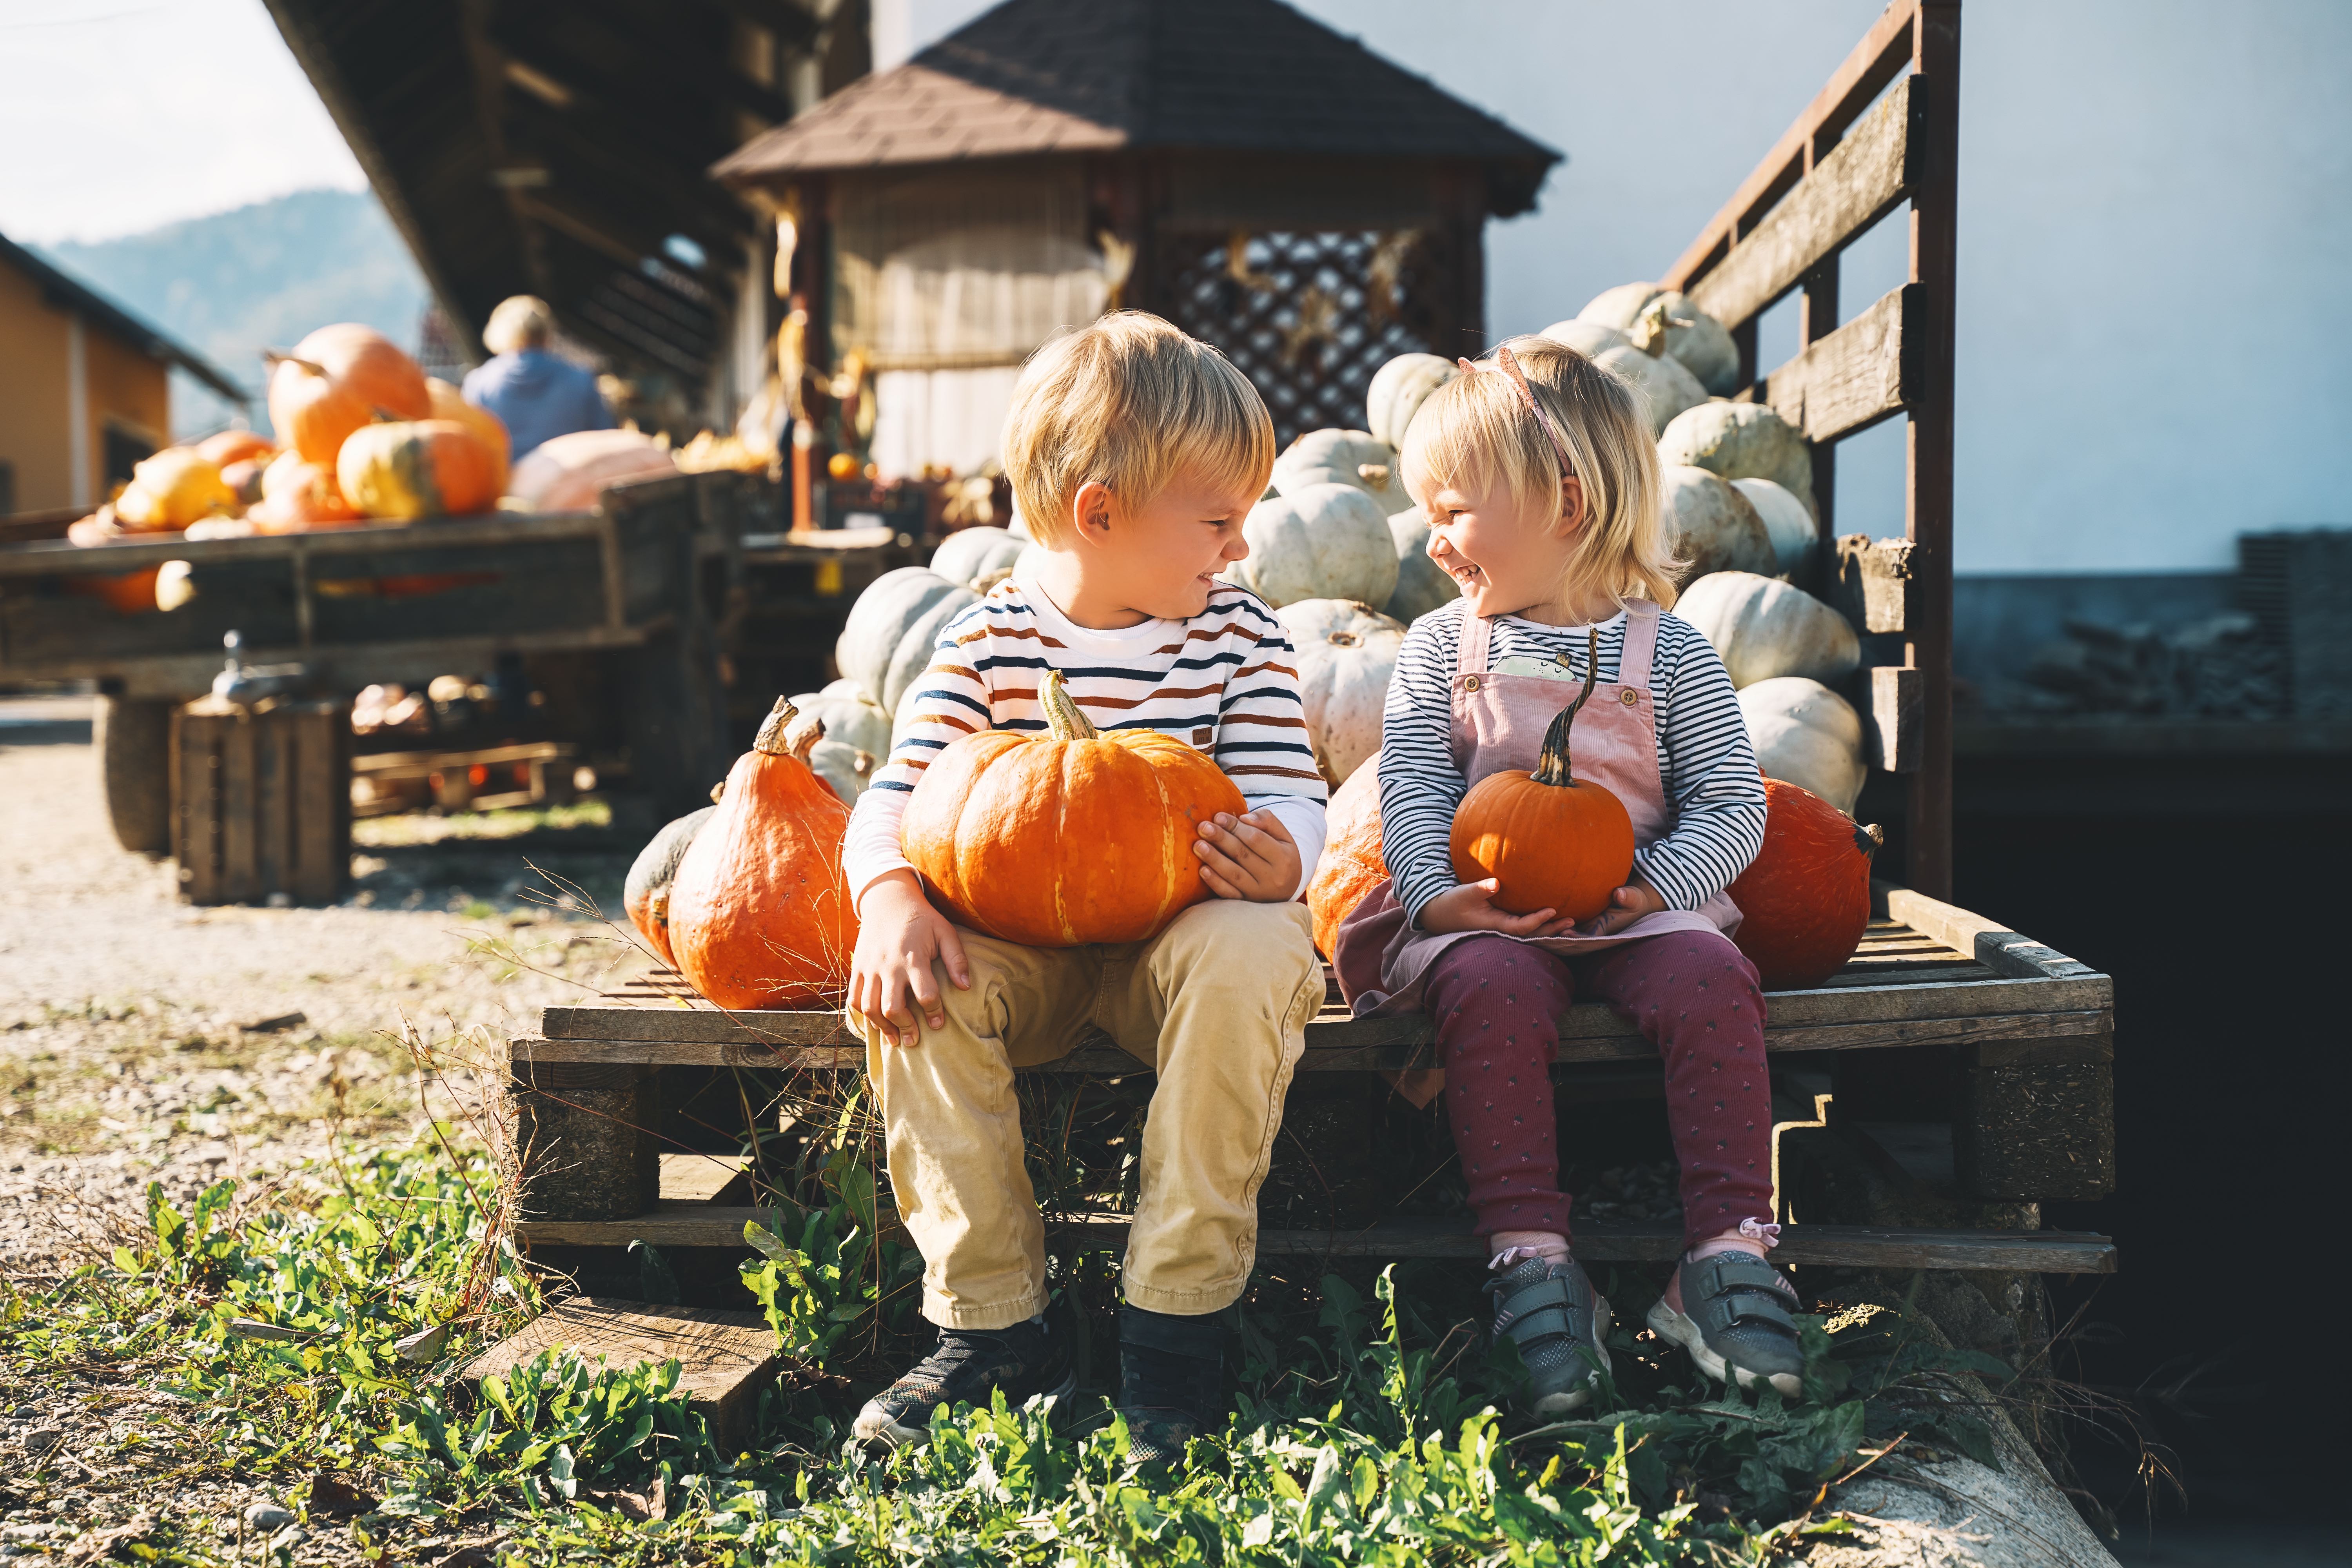 Children sitting with pumpkins at the farmers market